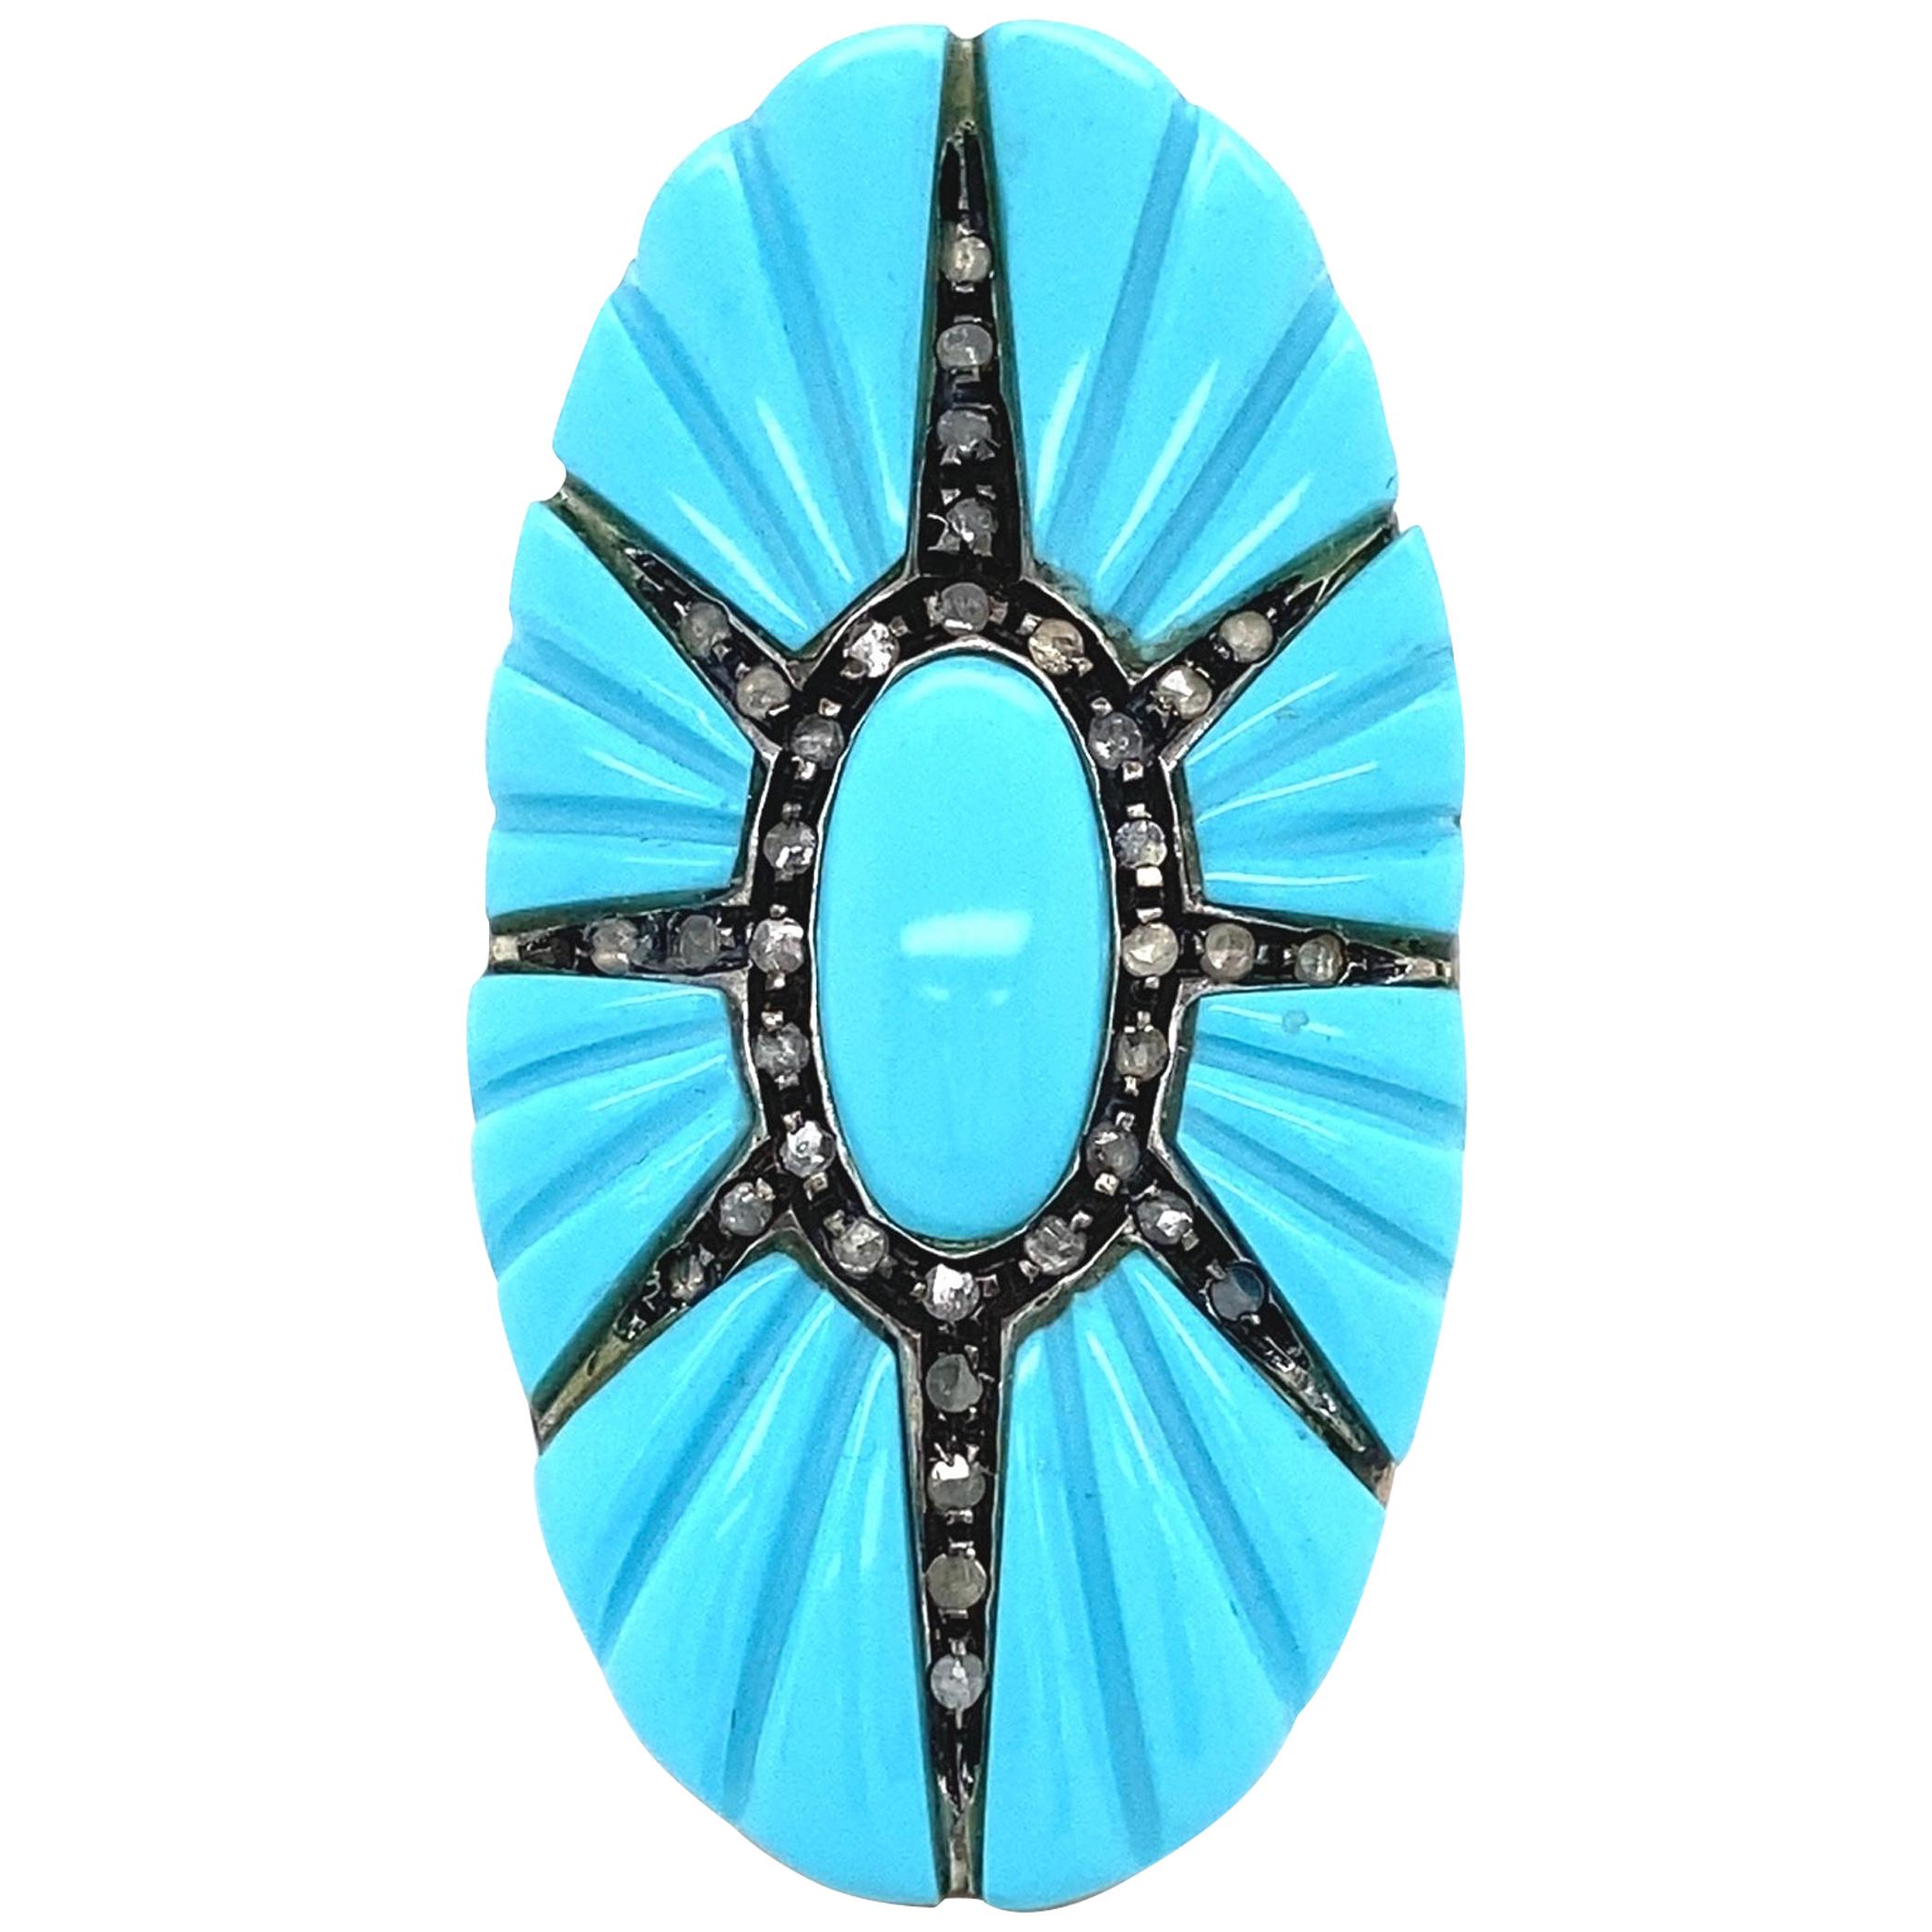 Large Turquoise and Diamond Star Burst Cocktail Ring Estate Fine Jewelry